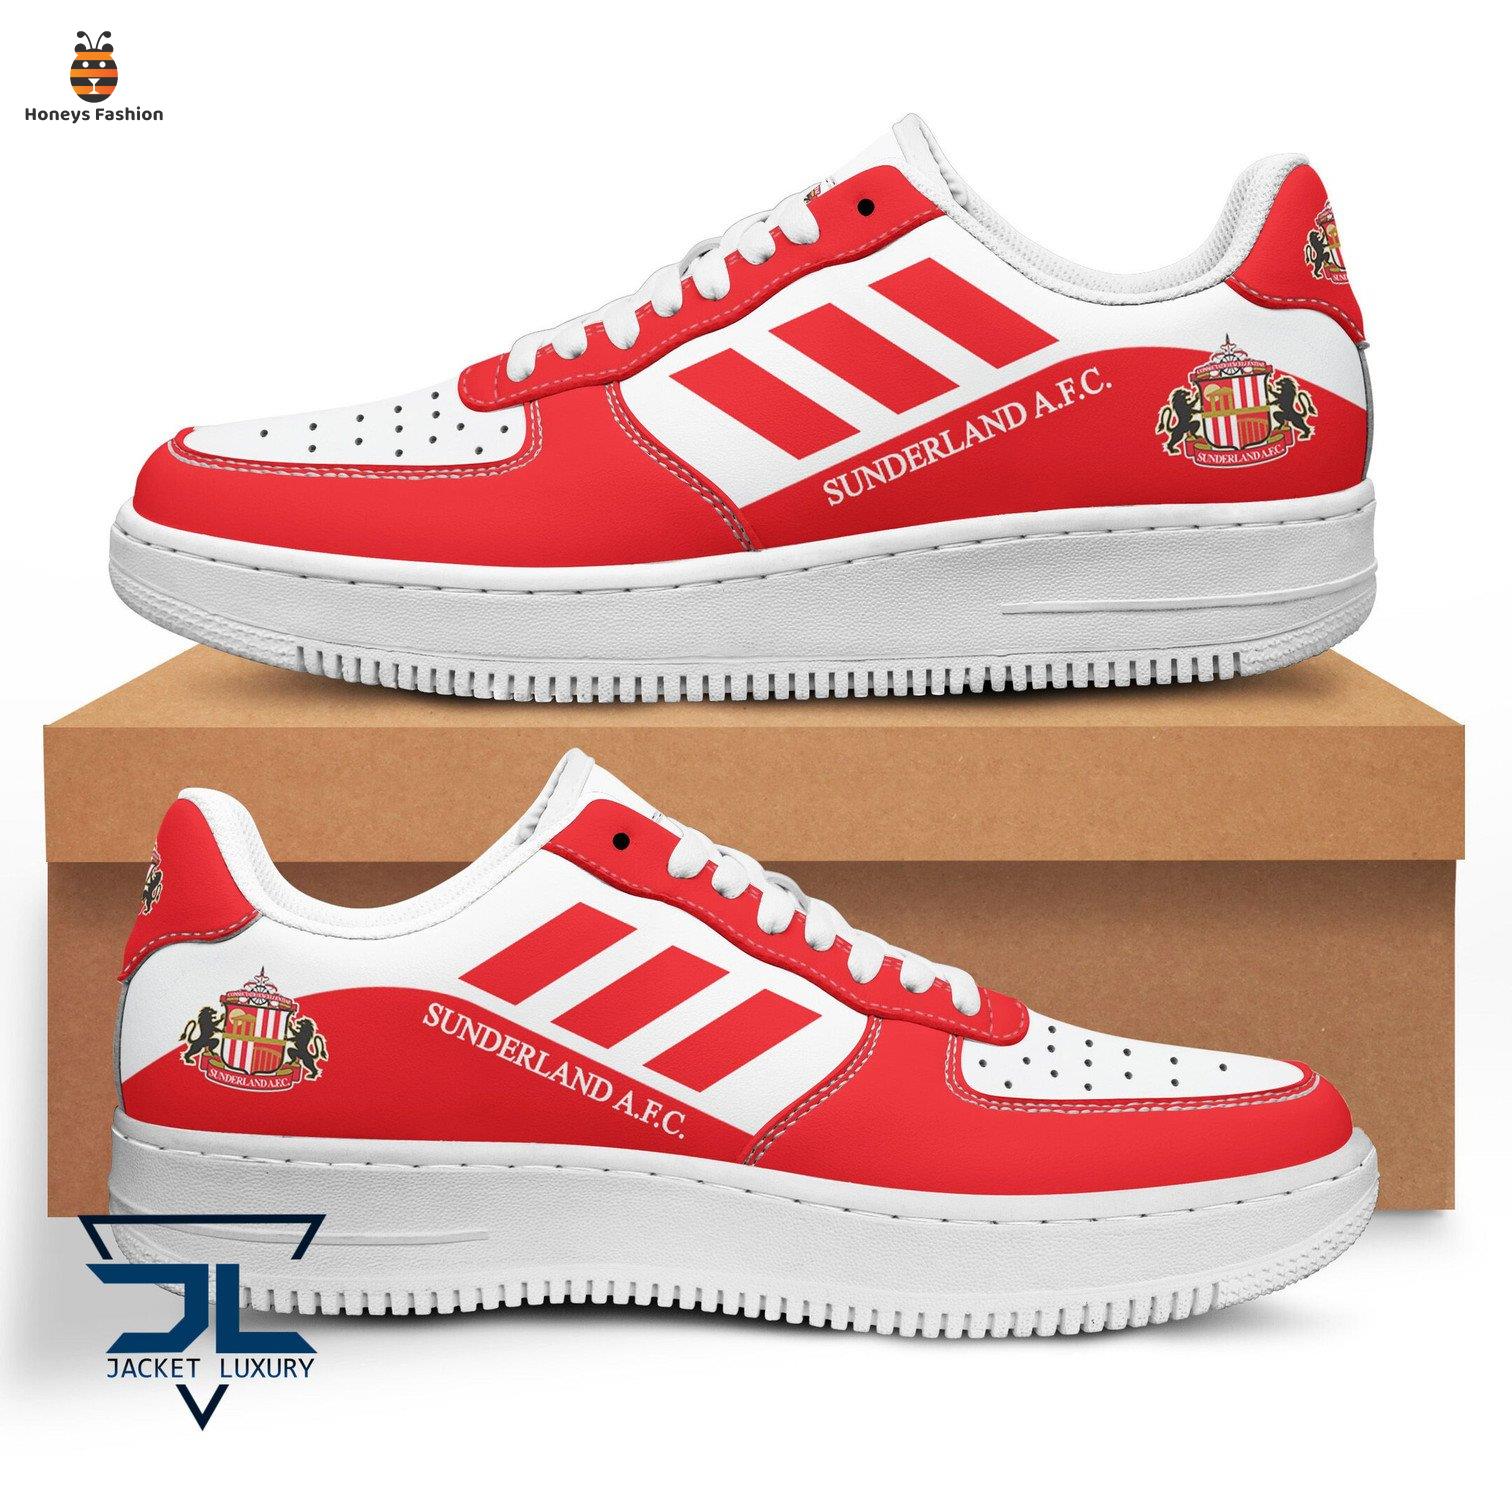 Sunderland A.F.C air force 1 shoes